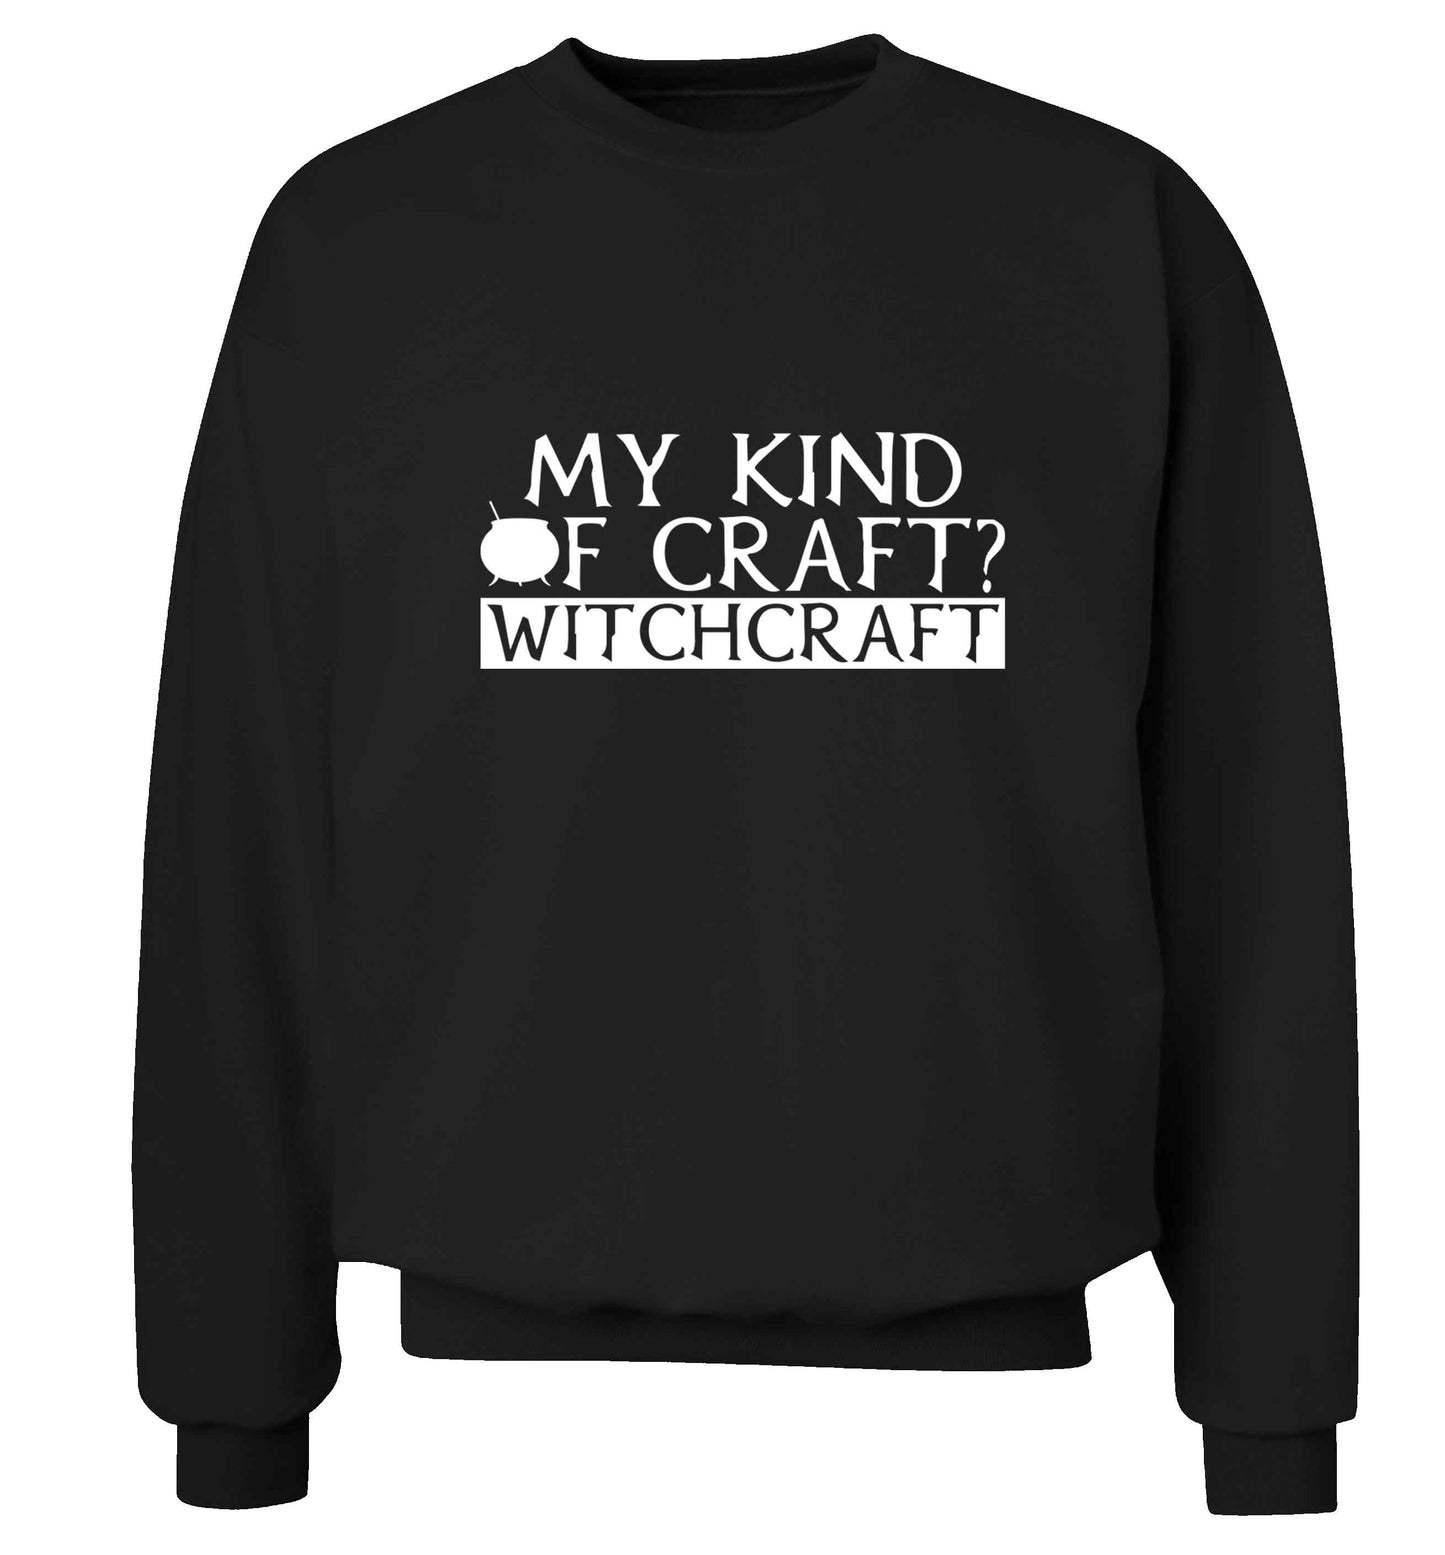 My king of craft? witchcraft  adult's unisex black sweater 2XL